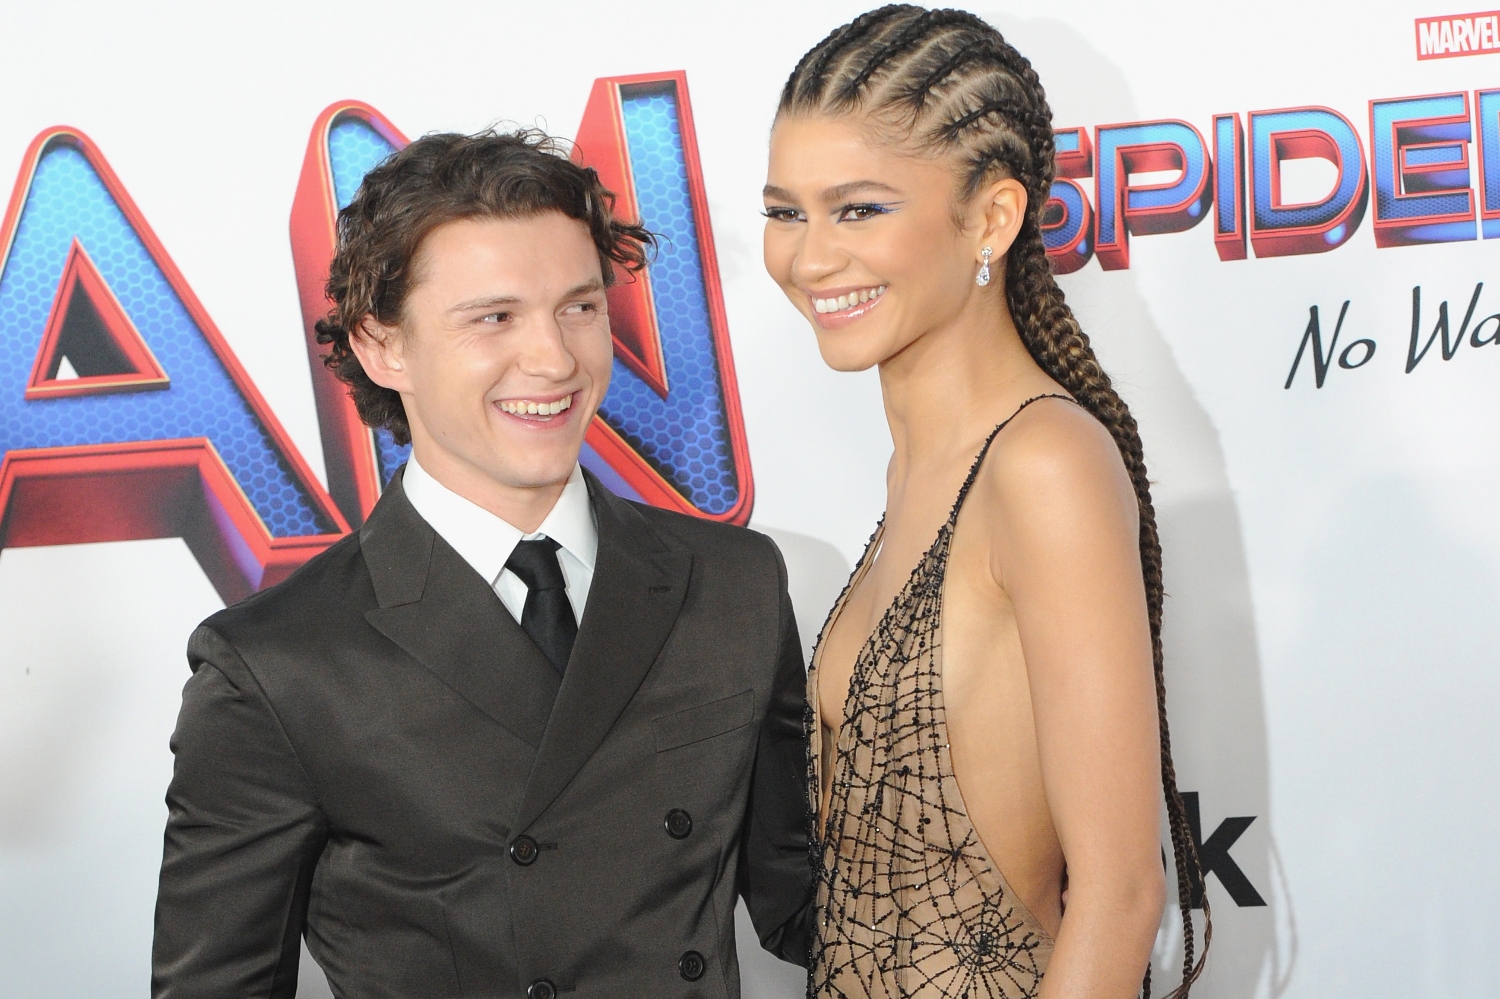 Tom Holland and Zendaya attend Sony Pictures' "Spider-Man: No Way Home" Los Angeles Premiere held at The Regency Village Theatre on December 13, 2021 in Los Angeles, California.